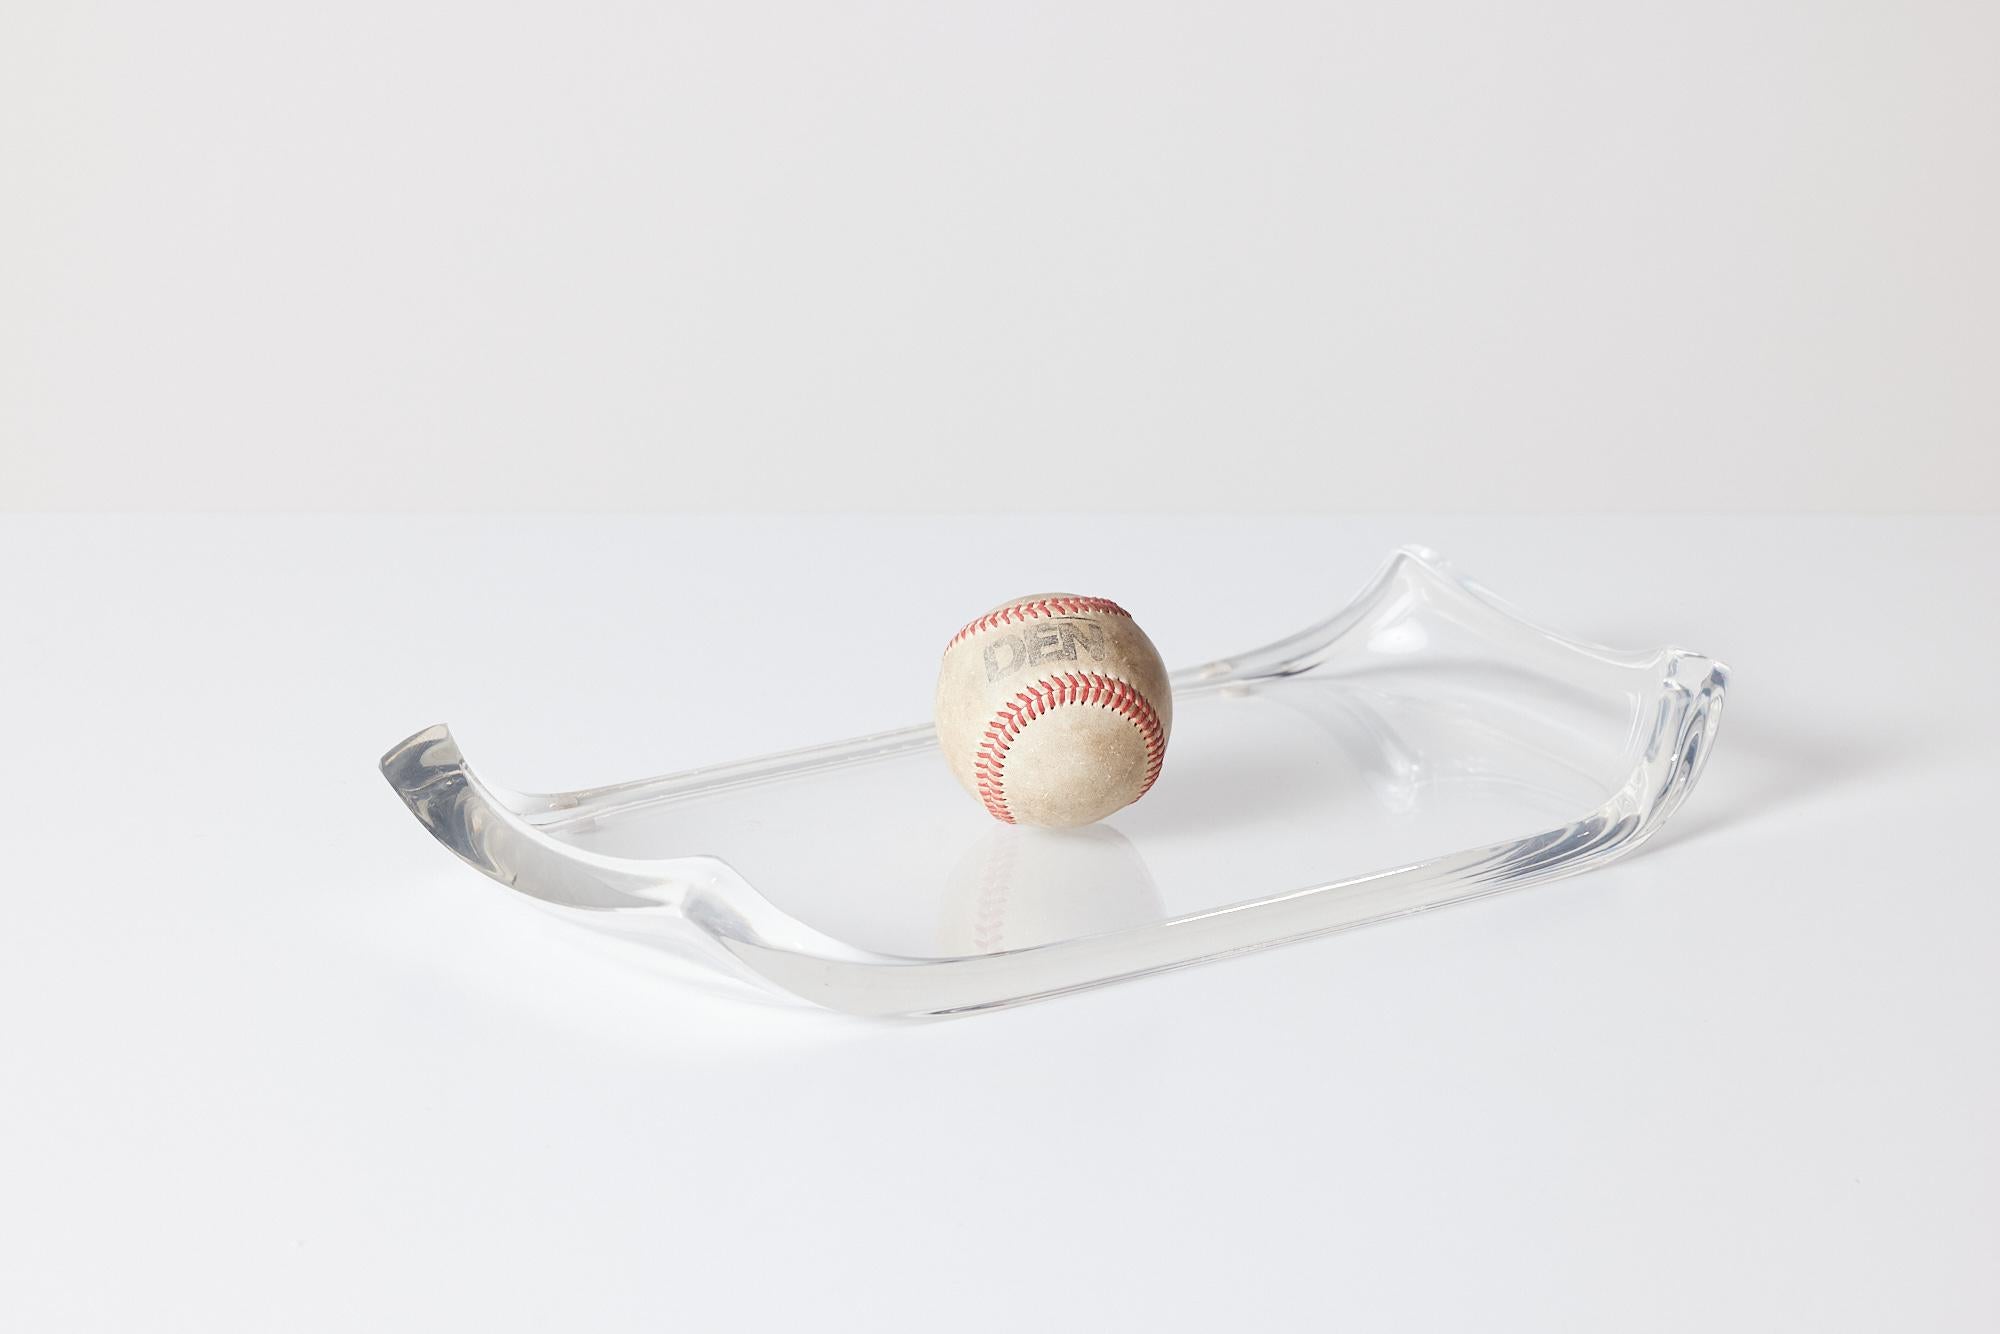 Rectangular Lucite tray with the two longer sides curving upwards.

Dimensions: 16